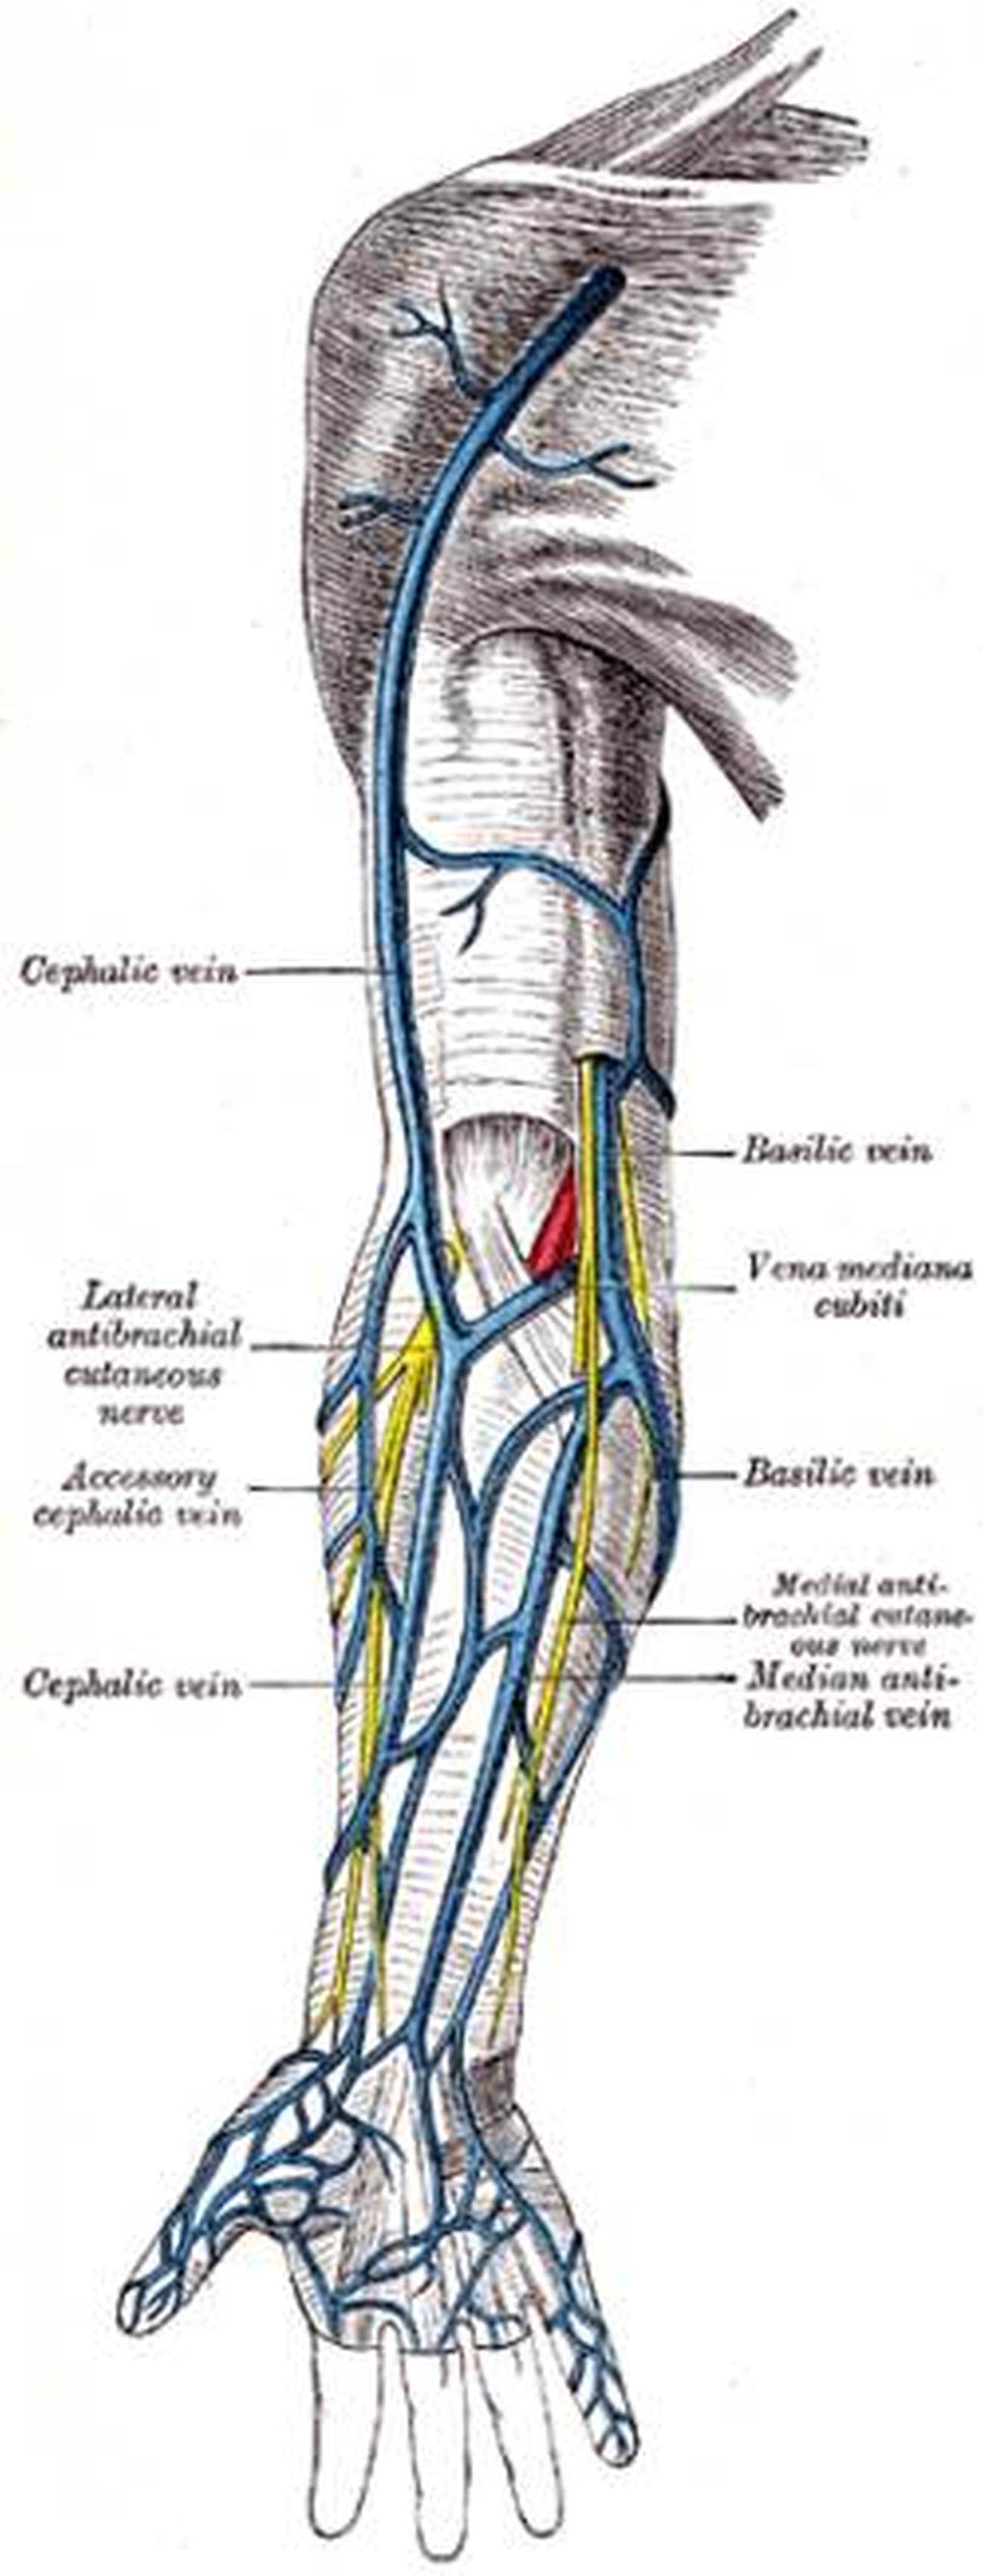 Pictures Of Basilic Vein. 